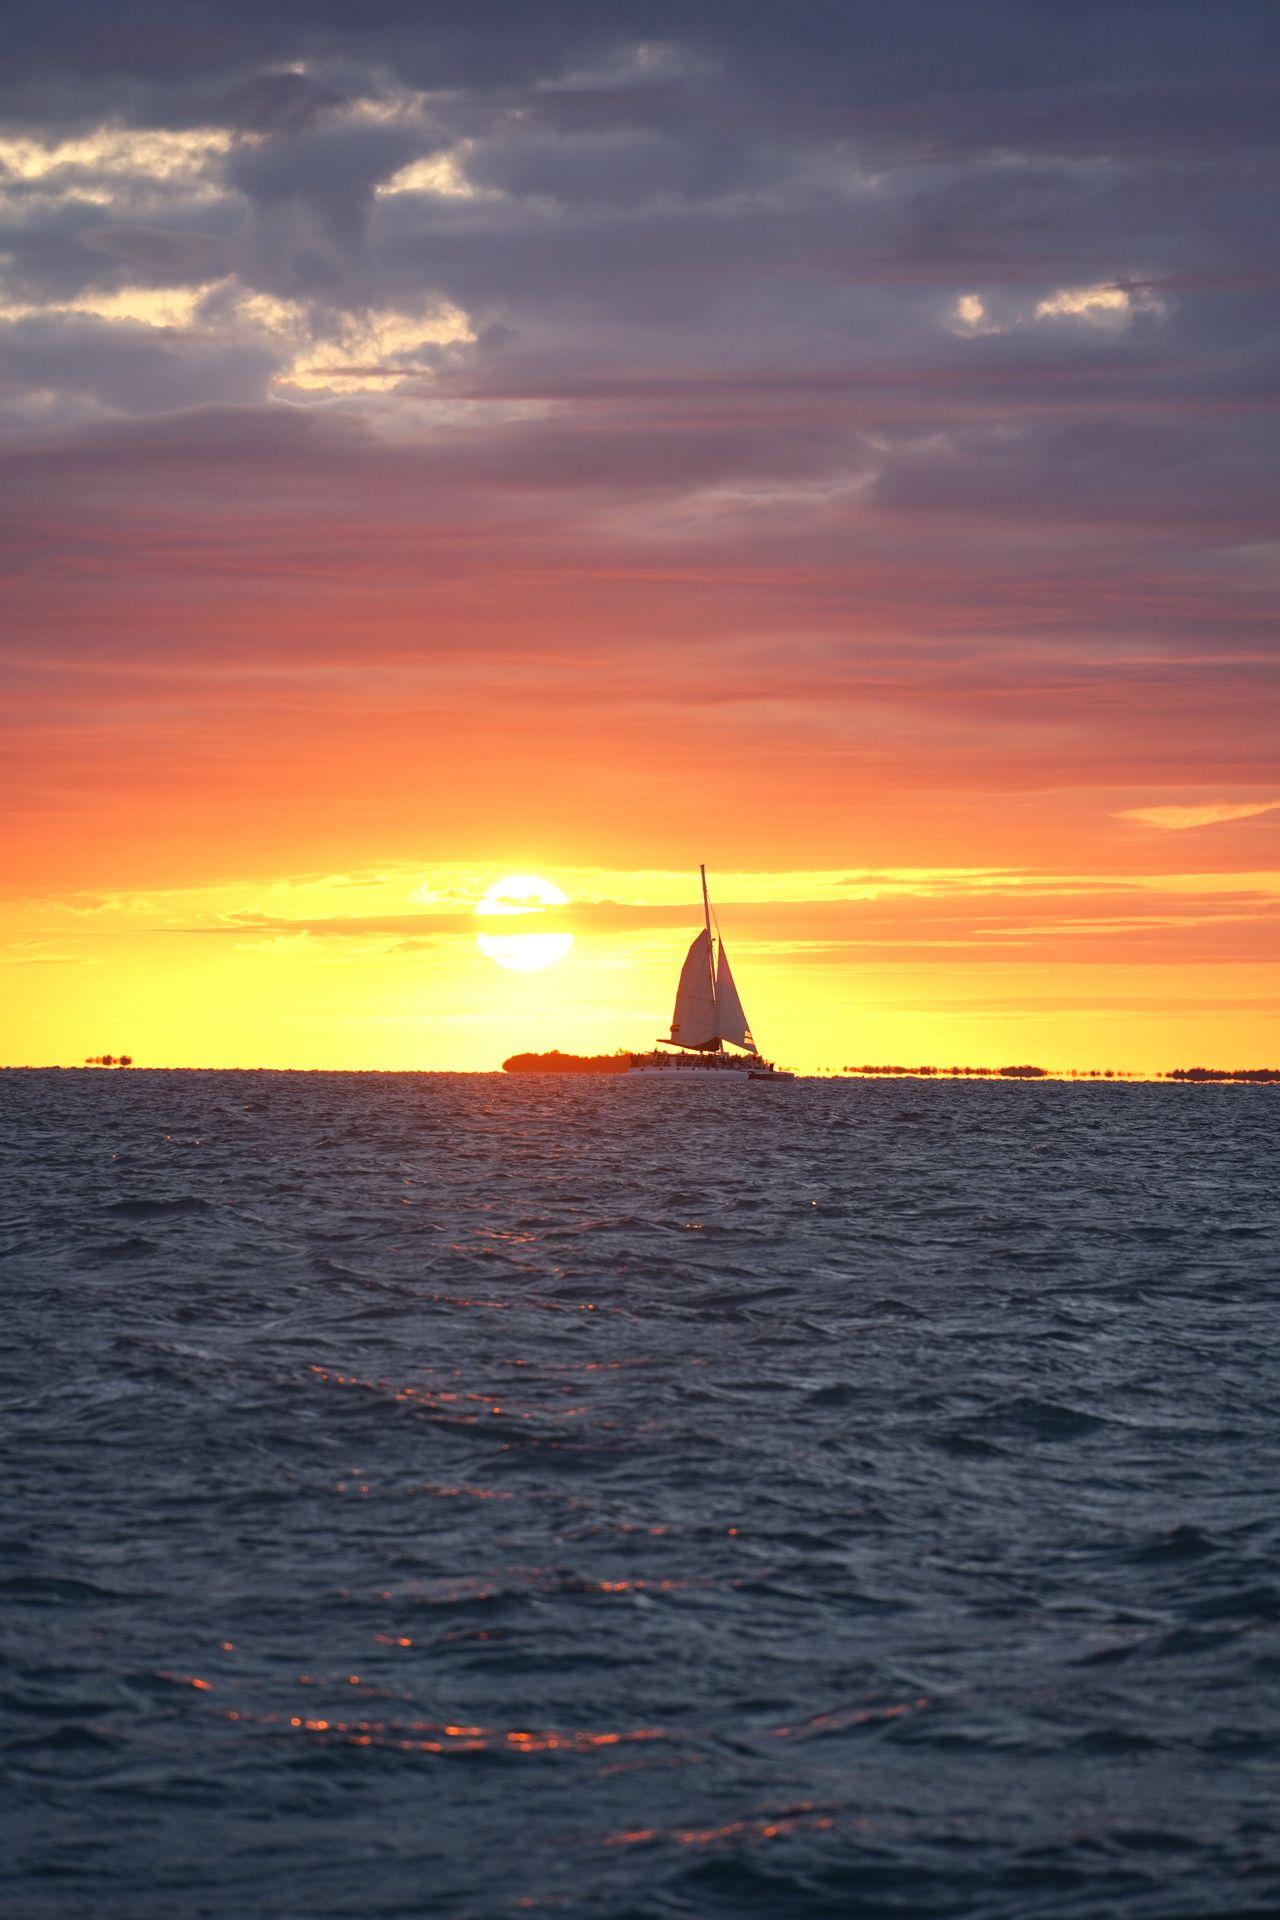 The sunset over the ocean with a sailboat silhouetting the sky